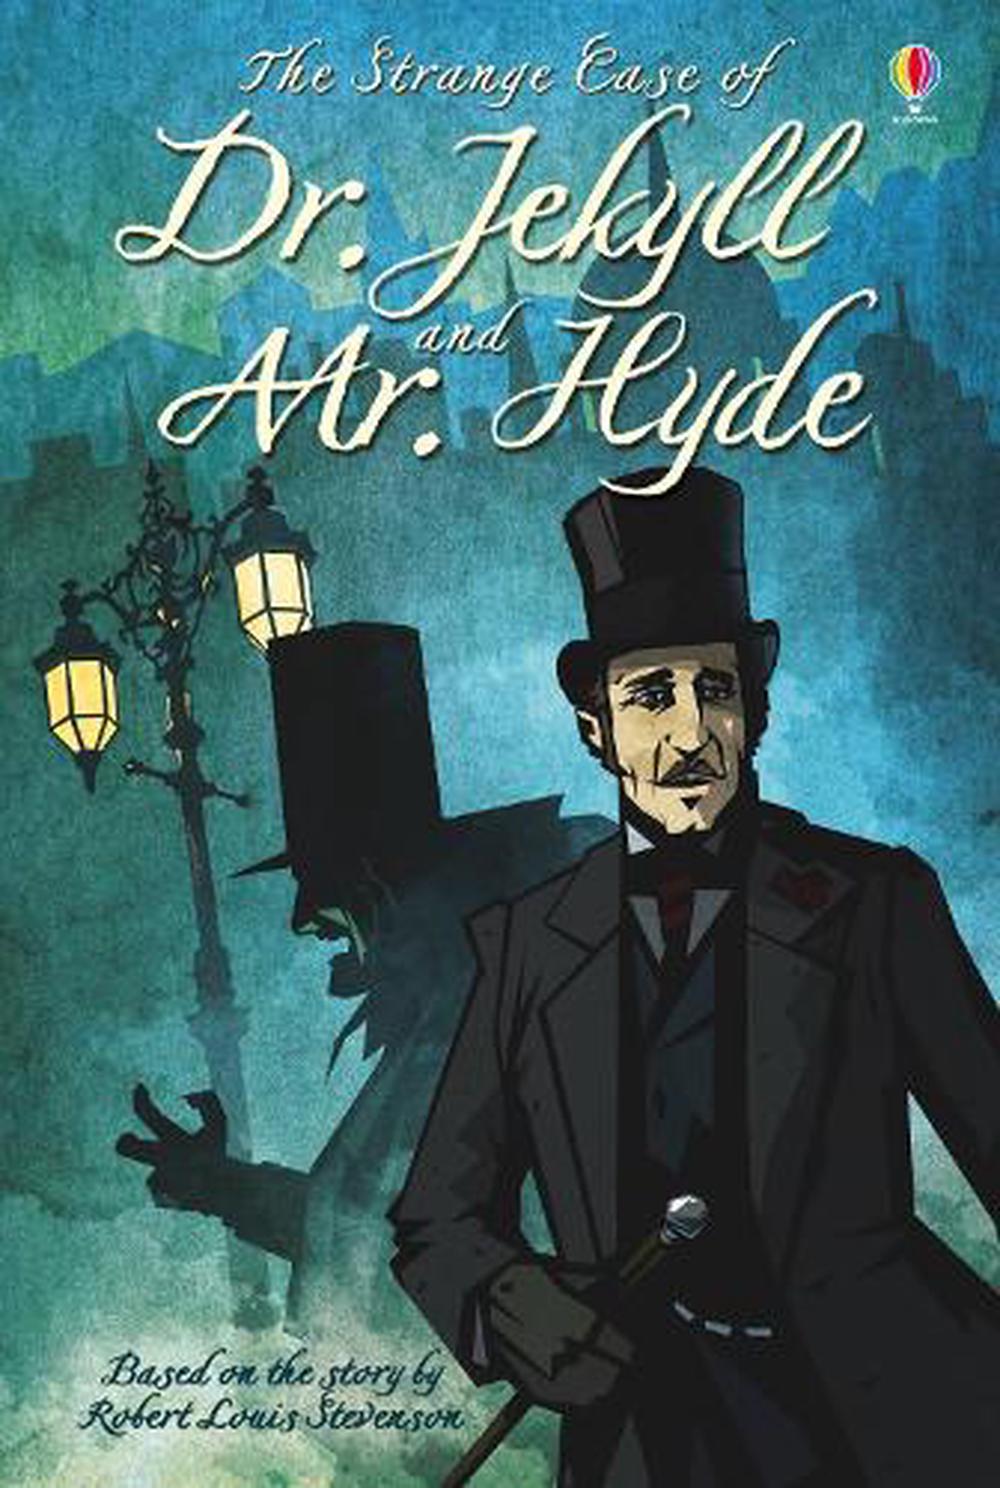 the strange story of dr jekyll and mr hyde